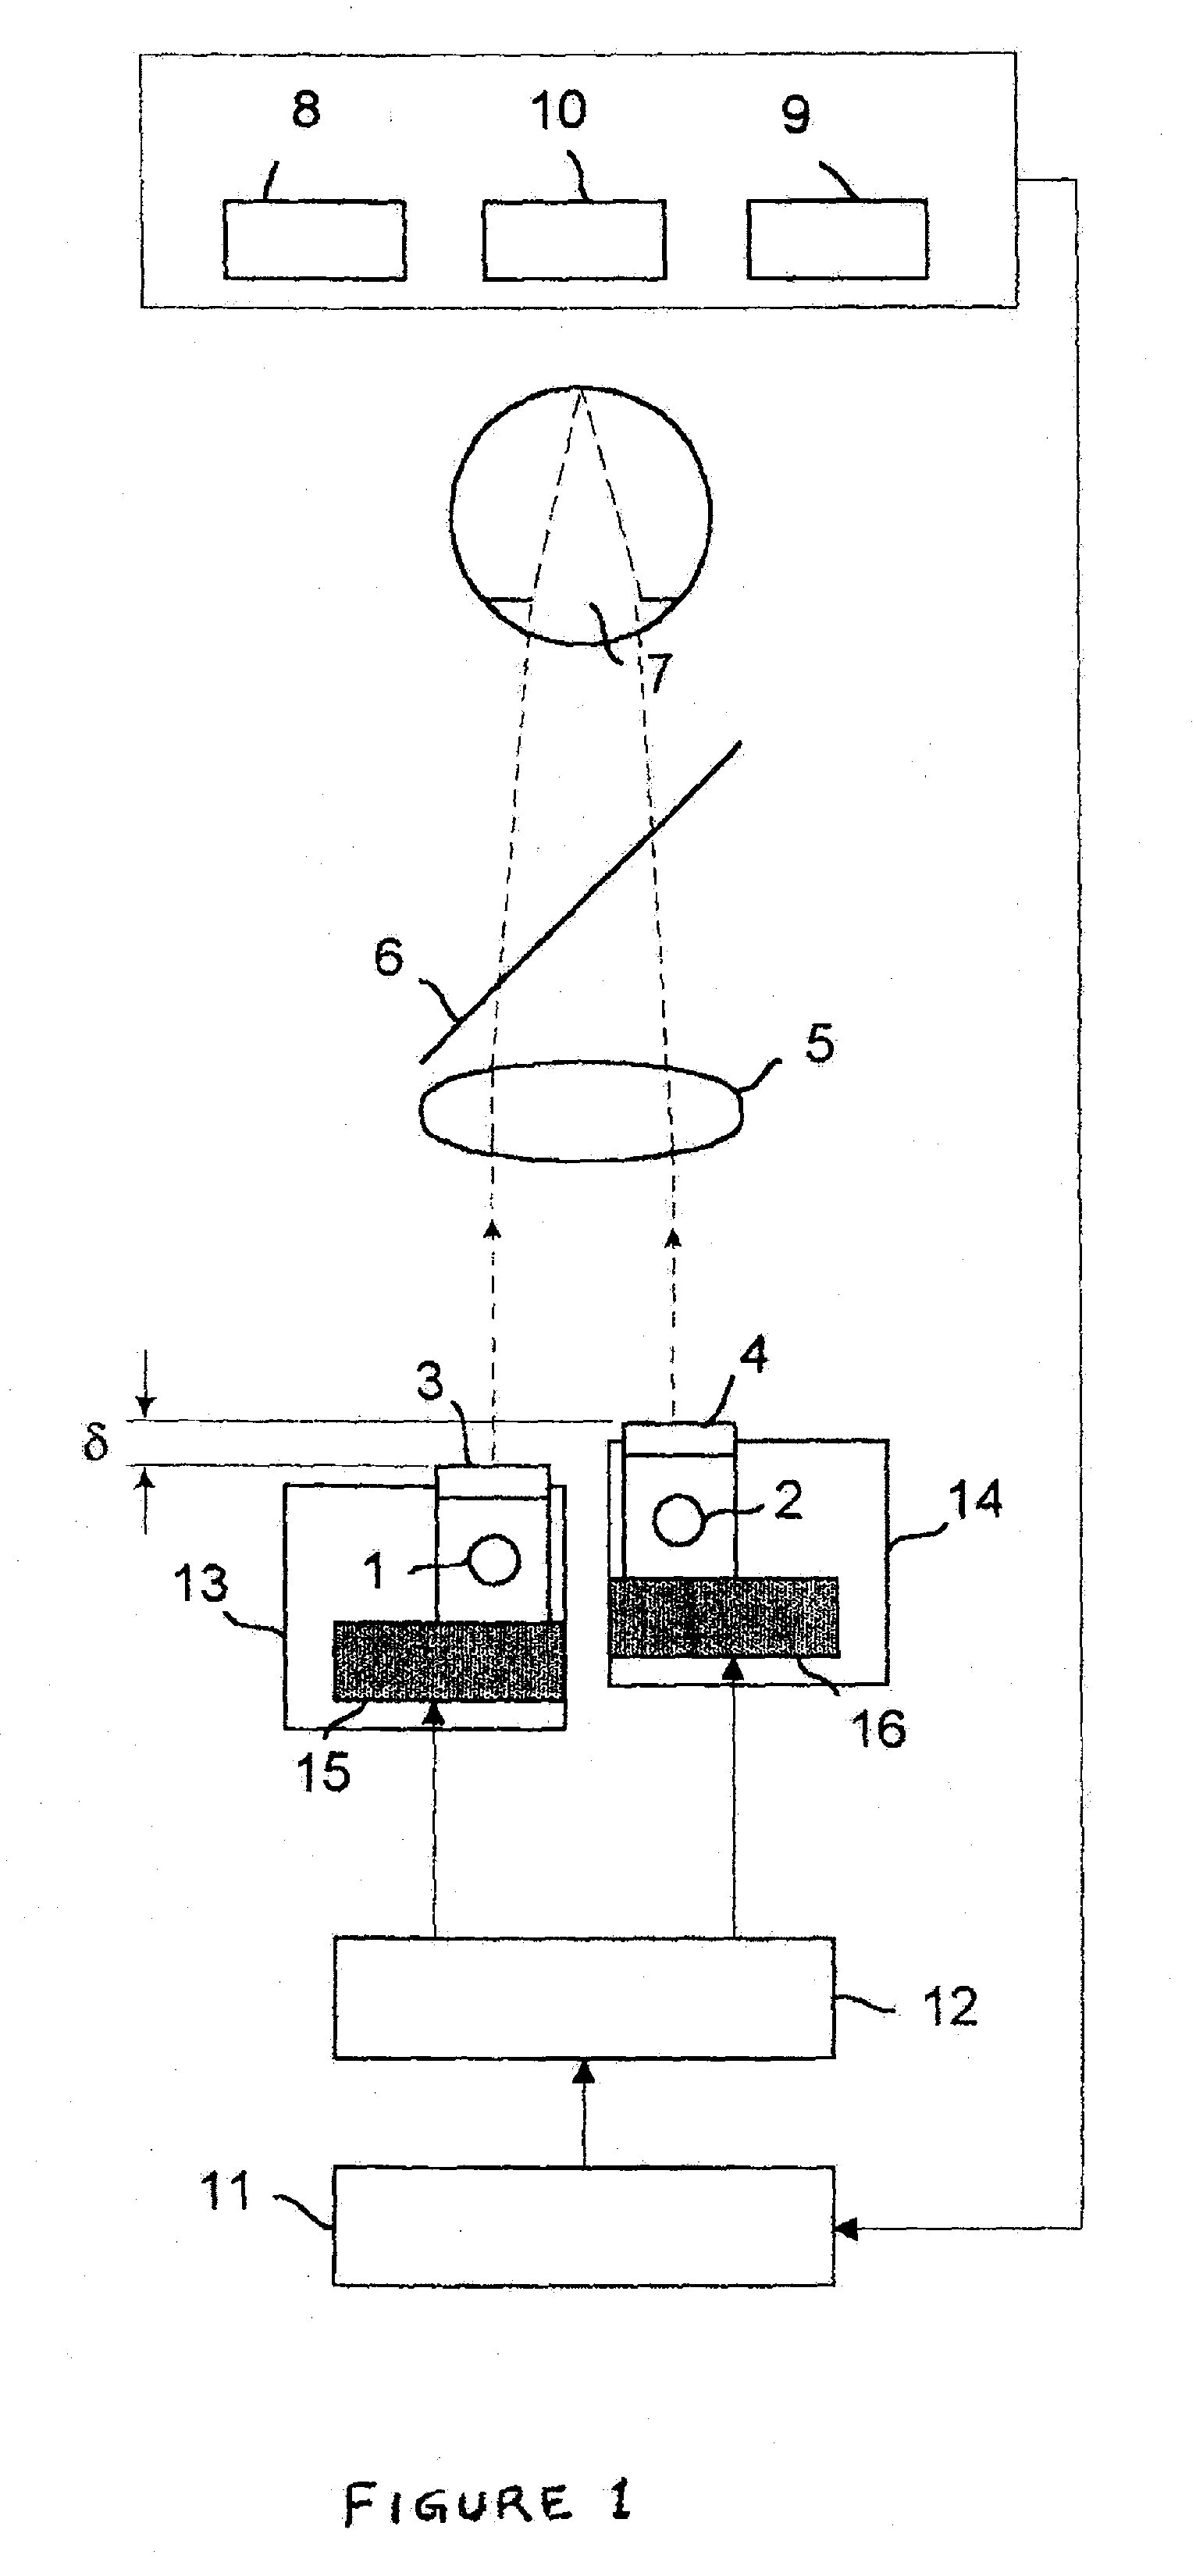 Apparatus and method for subjective determination of the refractive error of the eye